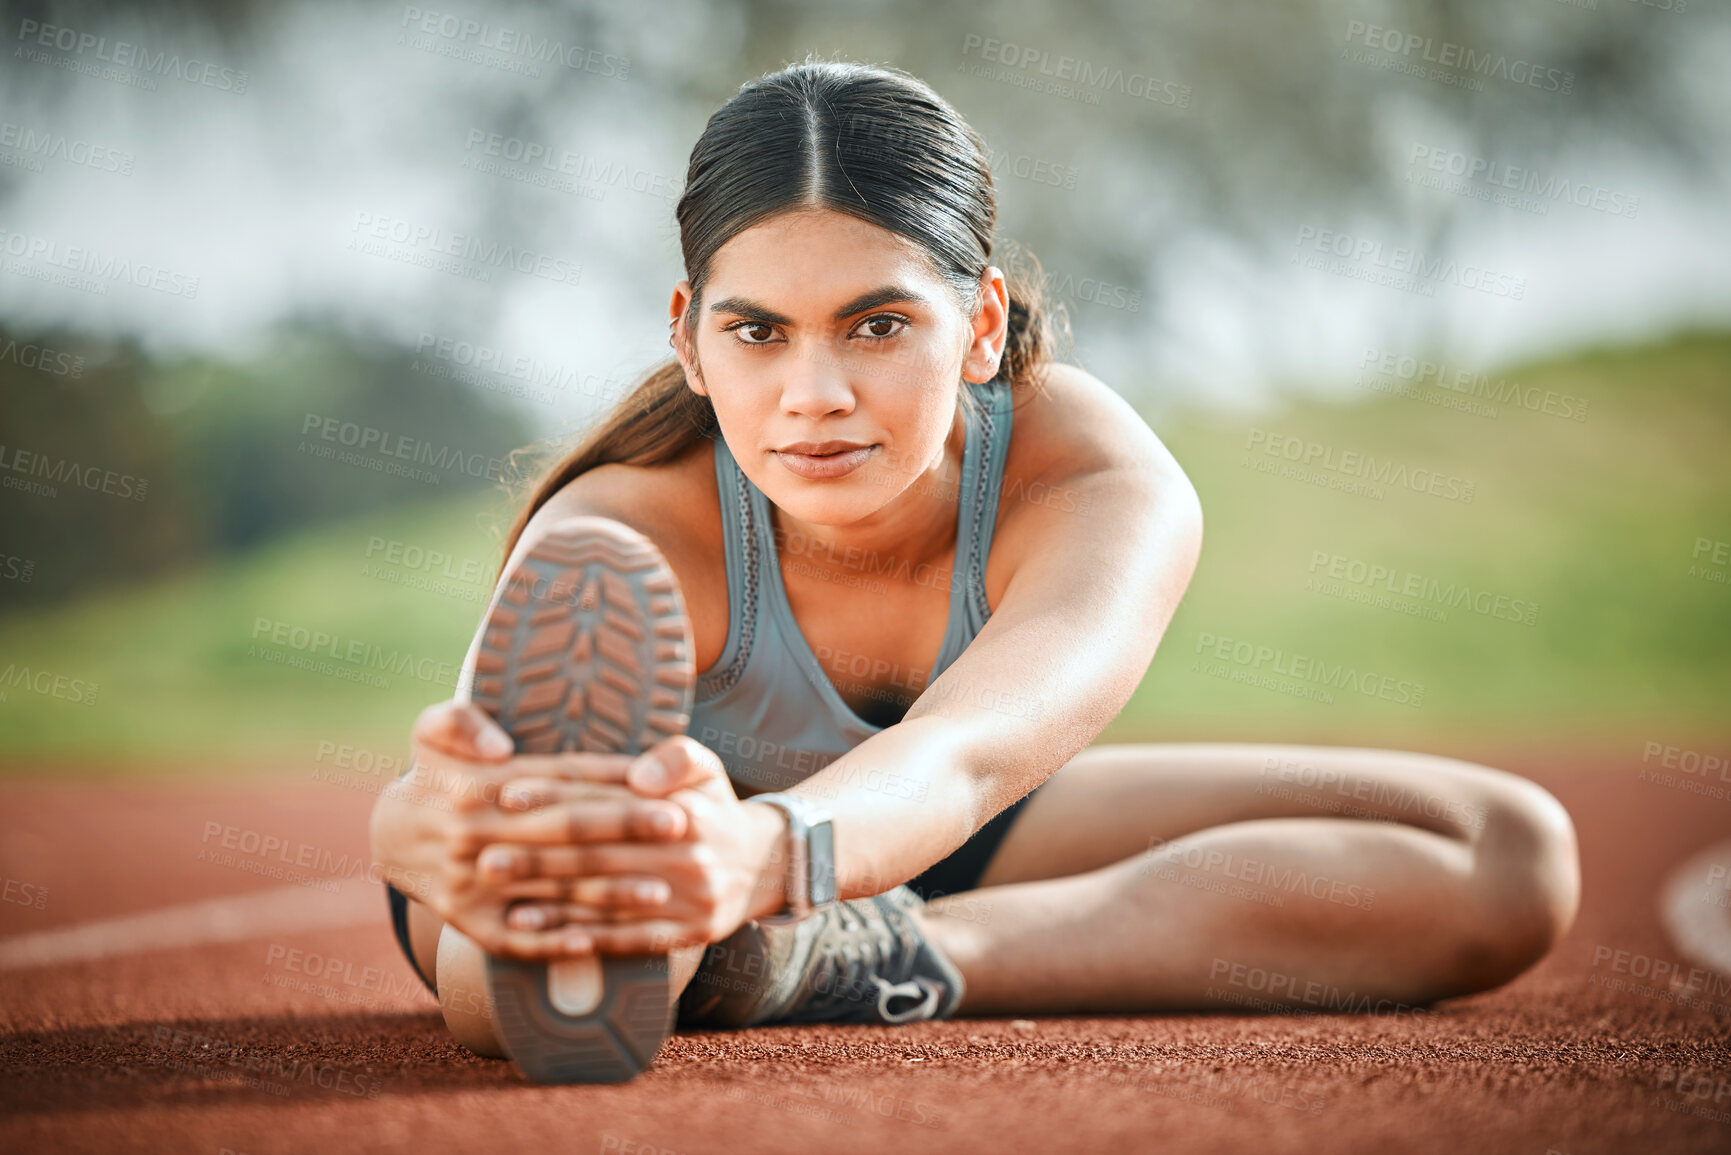 Buy stock photo Portrait of a young athlete stretching her legs on a running track outdoors